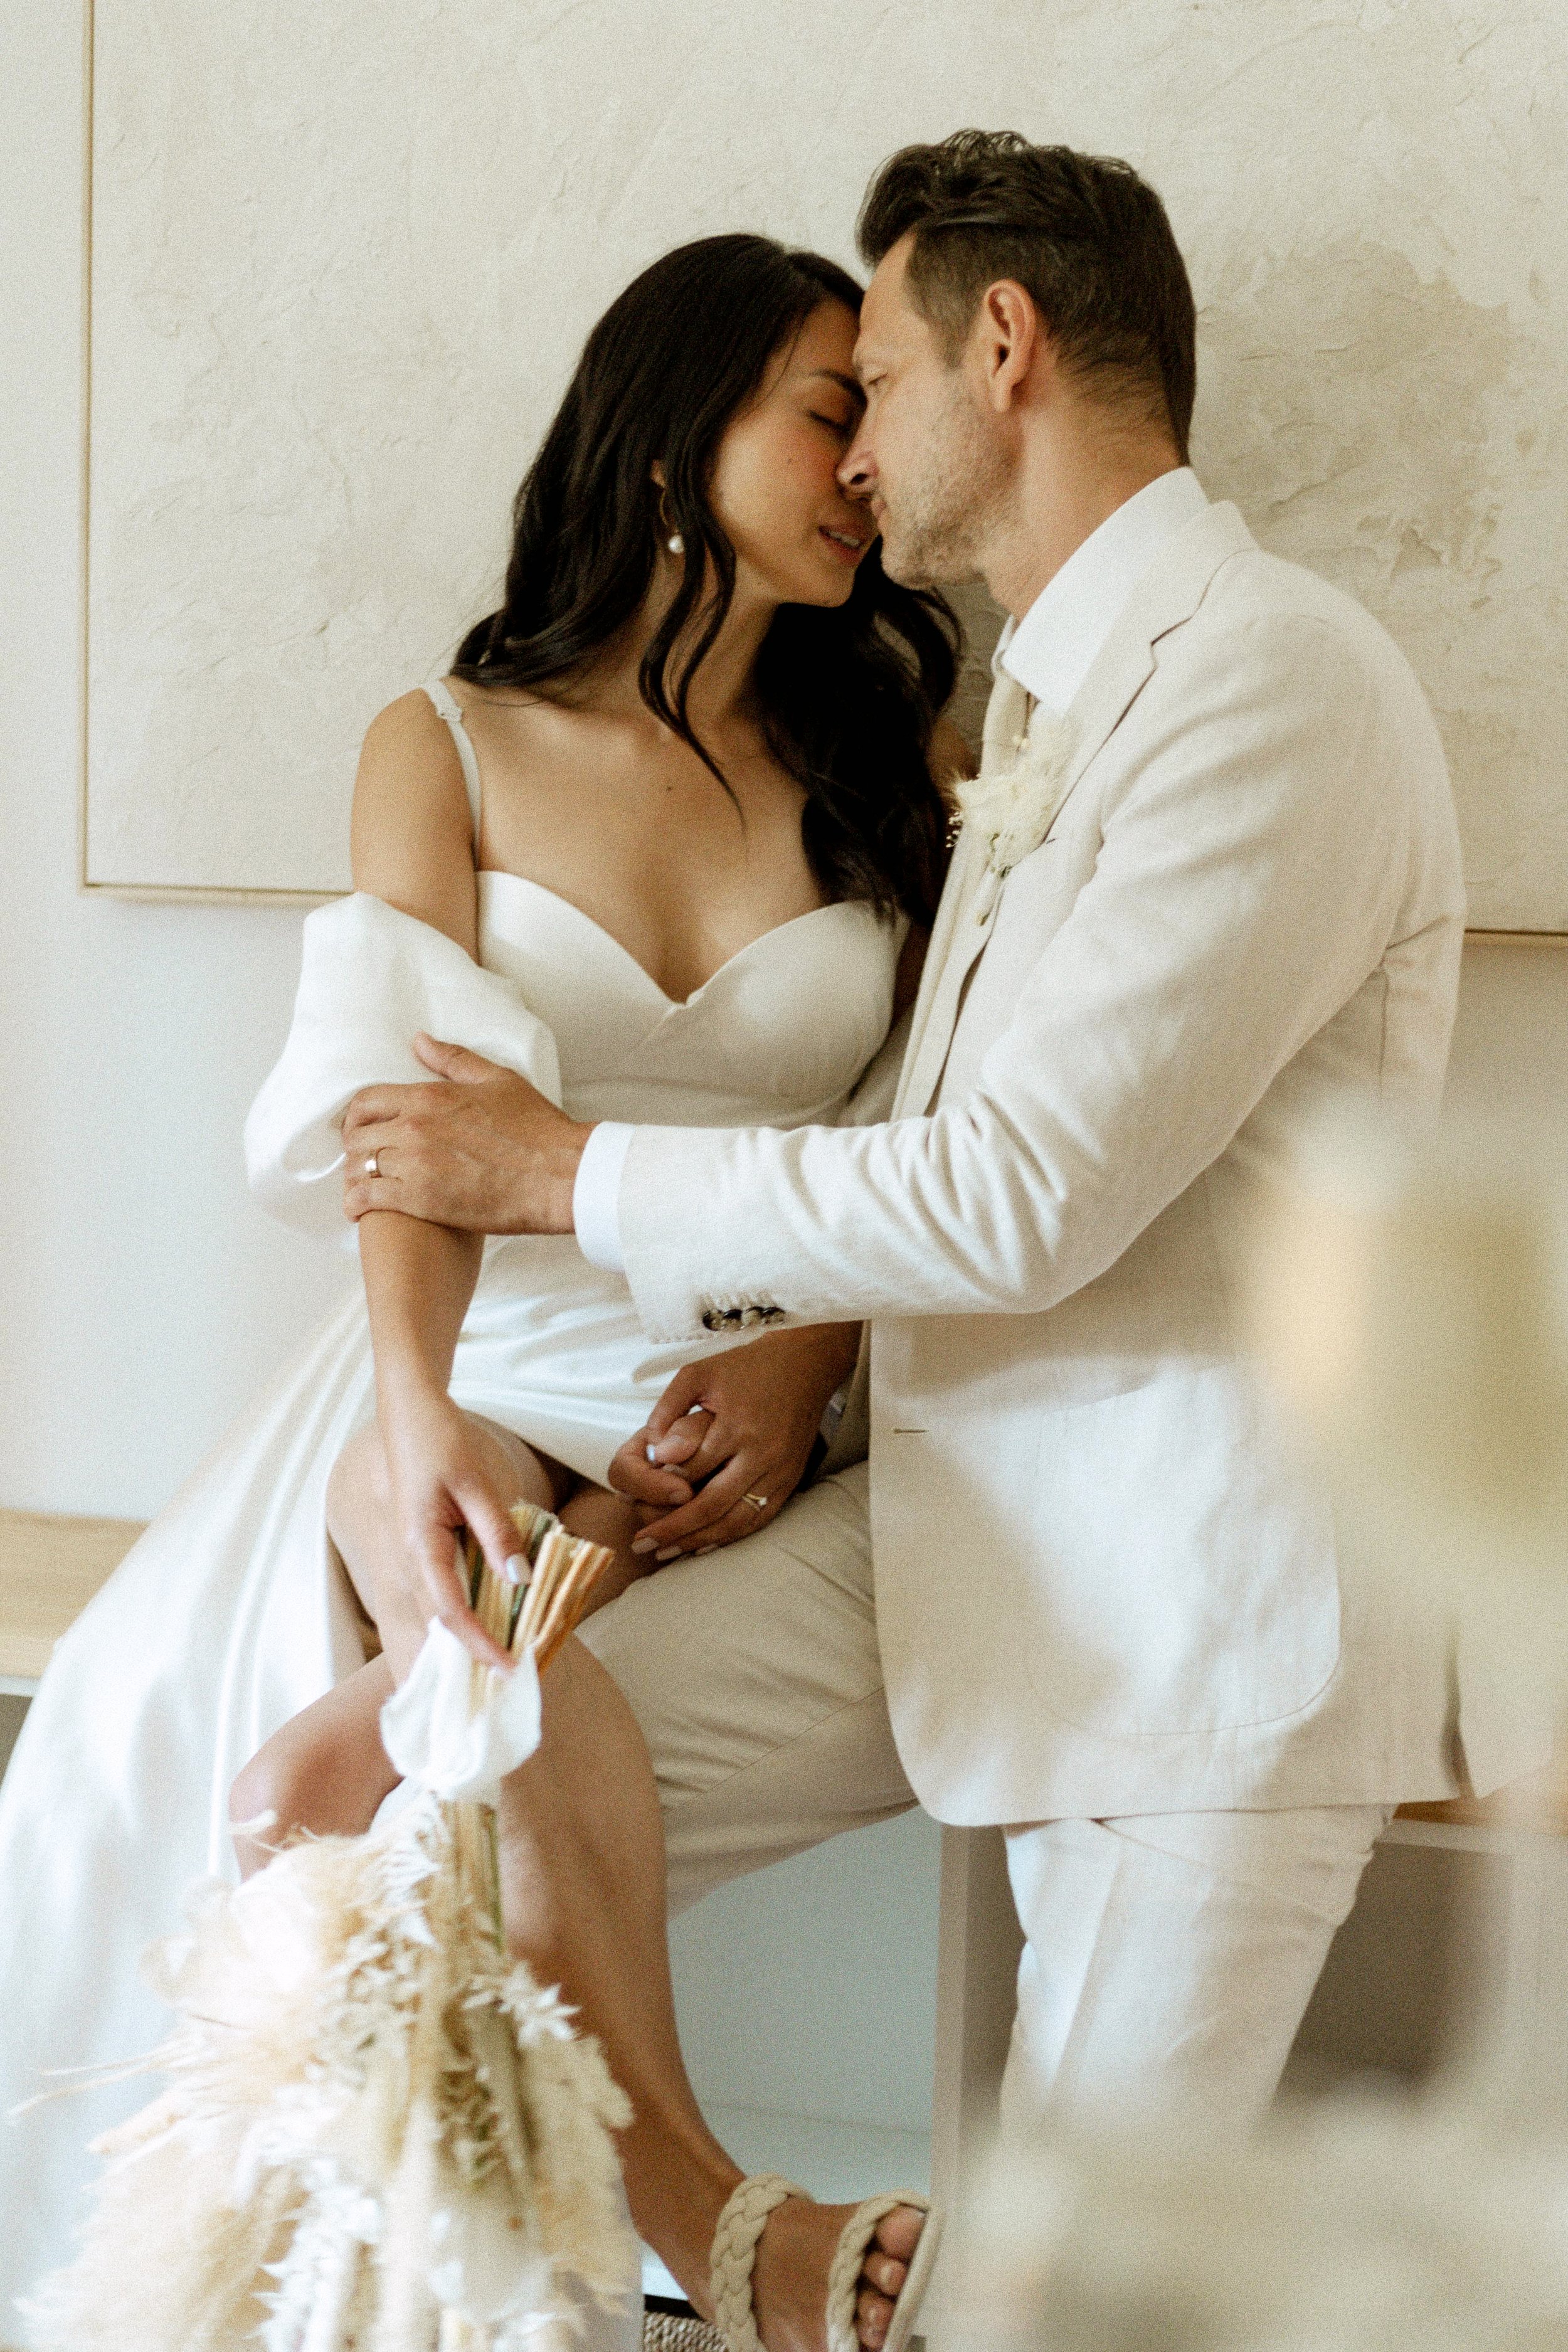 photo of bride and groom kissing while sitting on credenza while celebrating their elopement together - wedding photographer in Toronto